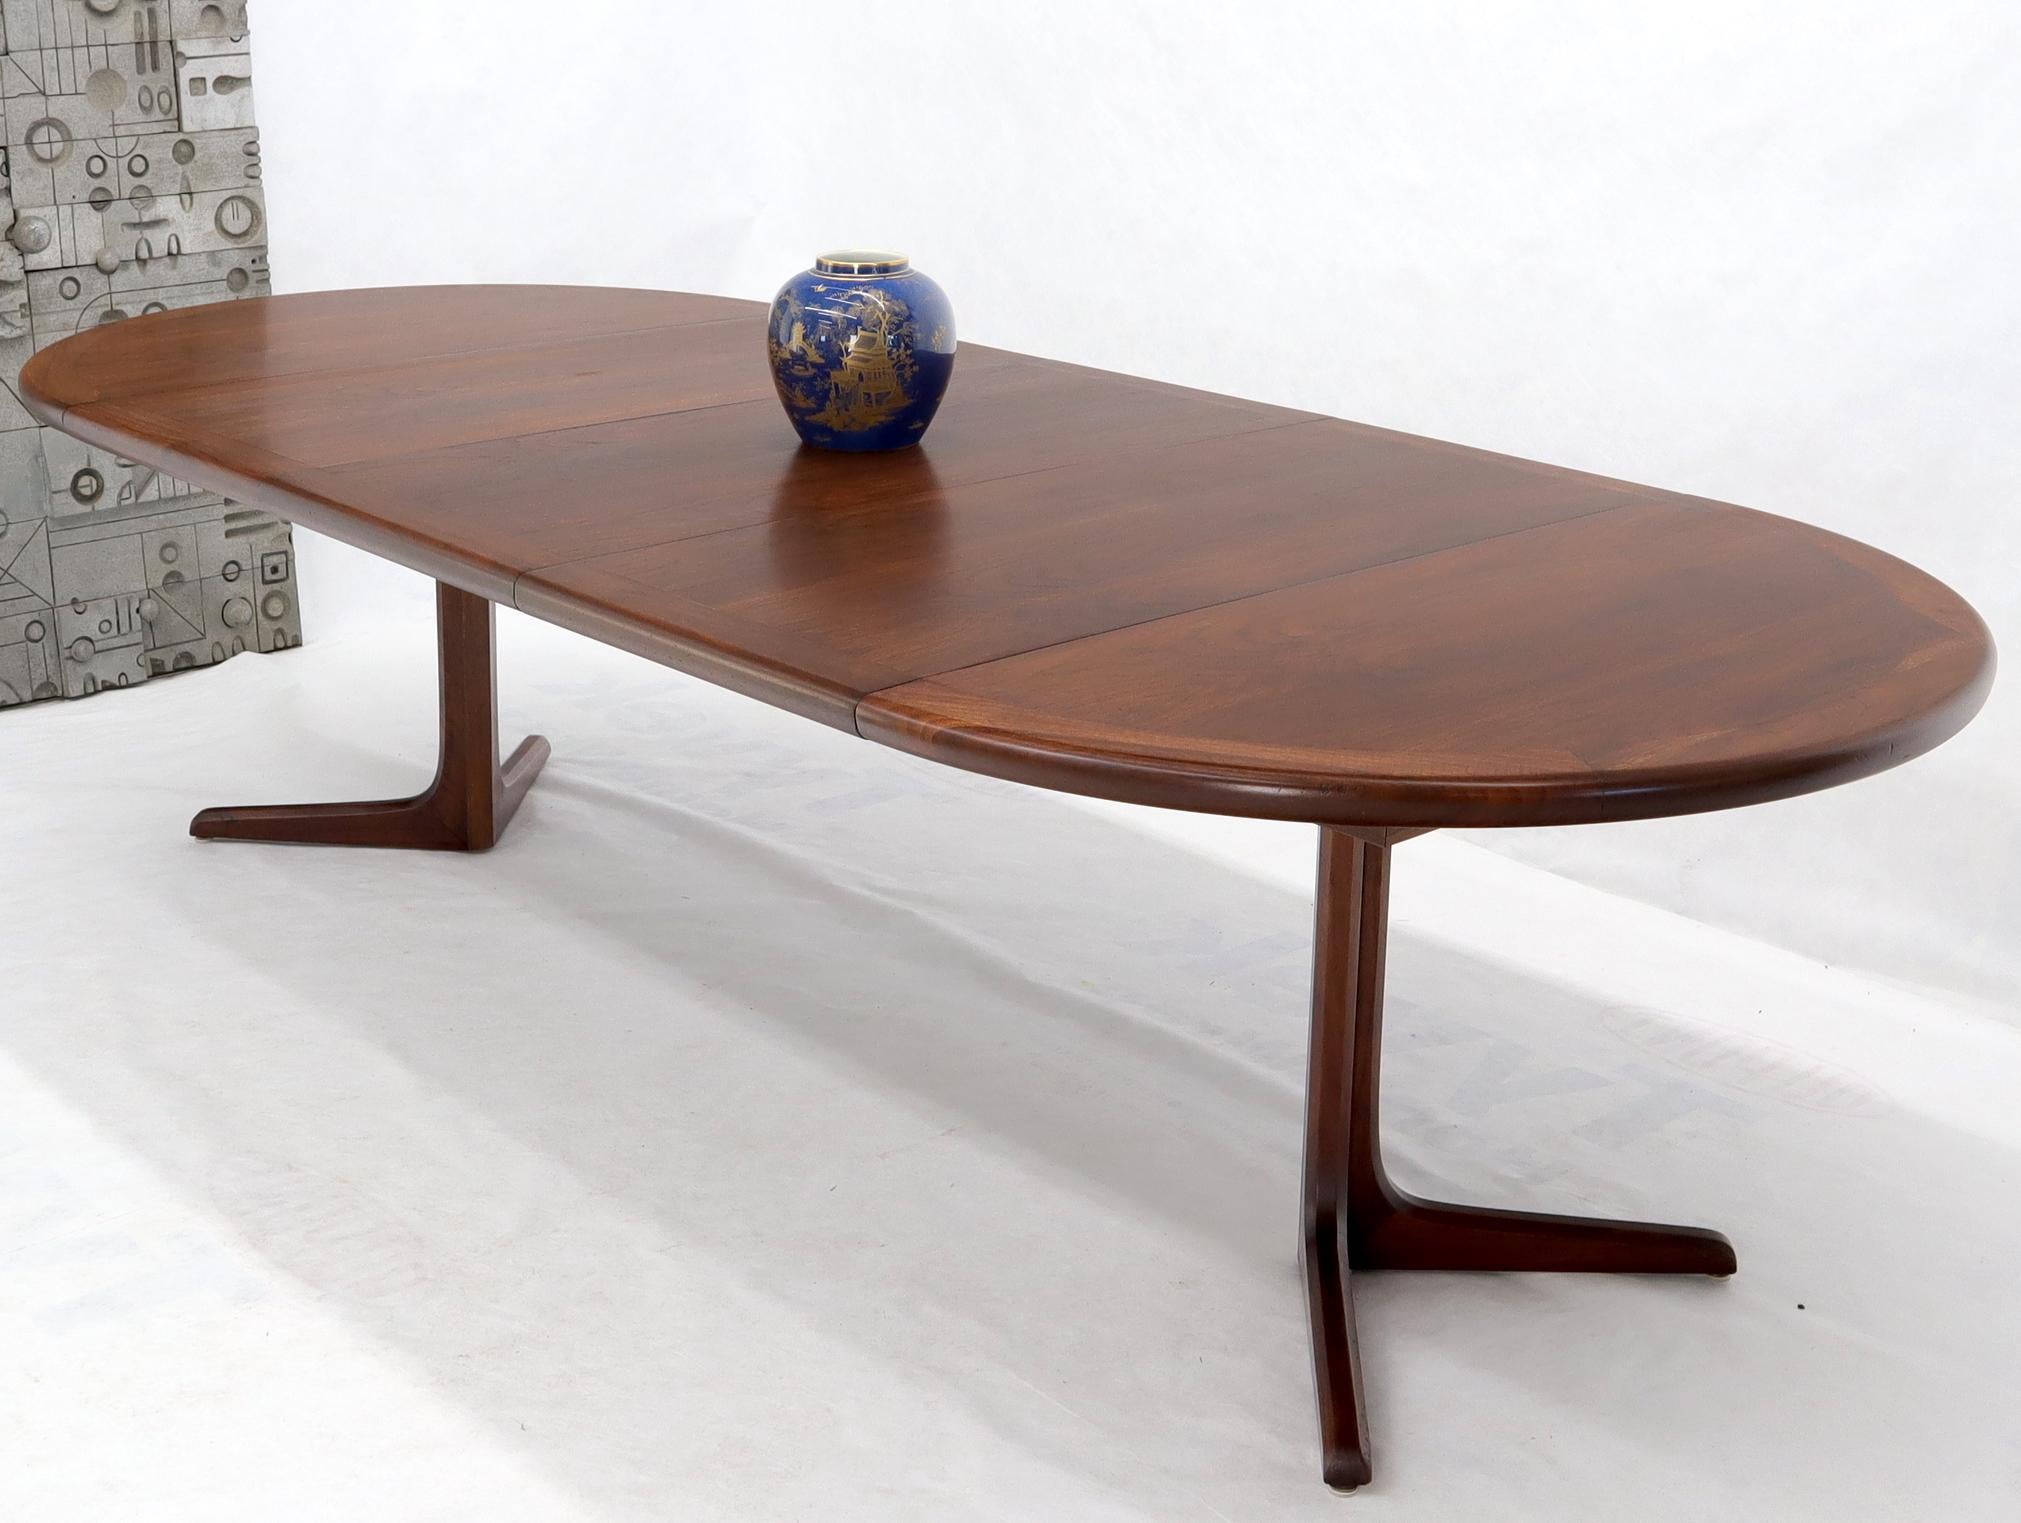 Mid-Century Modern round walnut dining table by John Stuart. Comes with 3 x 20